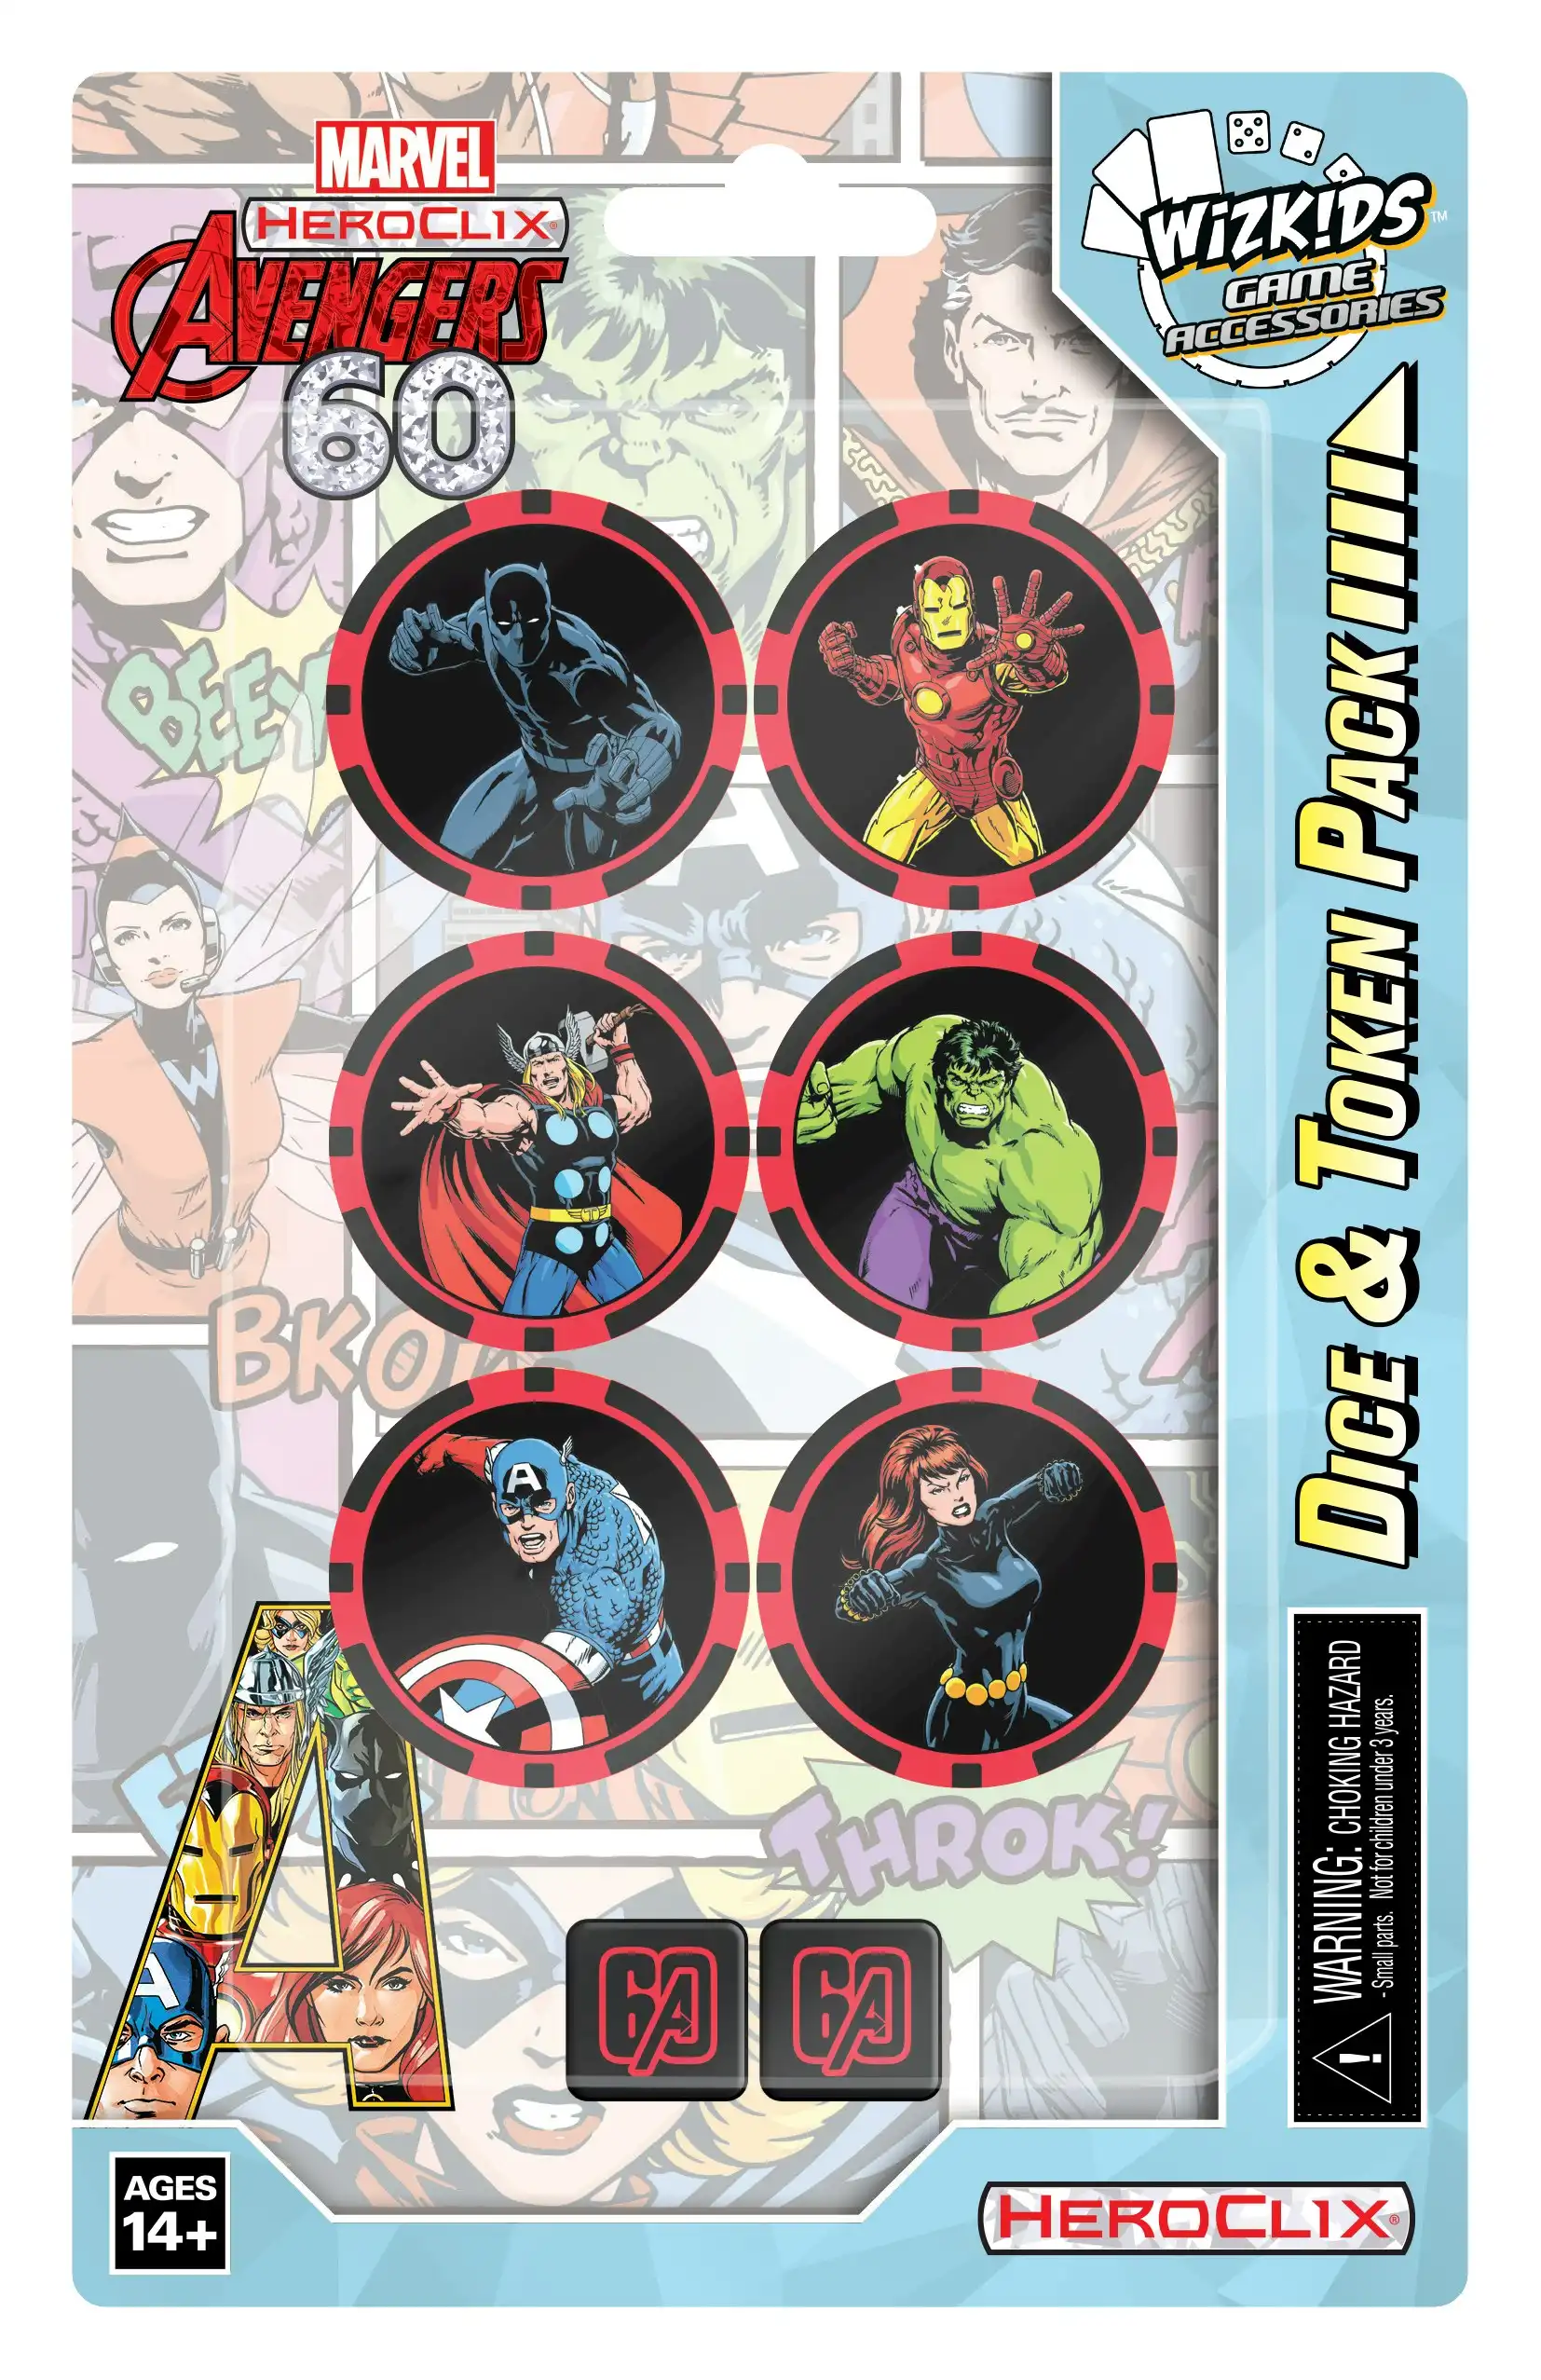 Marvel Heroclix Avengers 60th Anniversary Dice and Token Pack